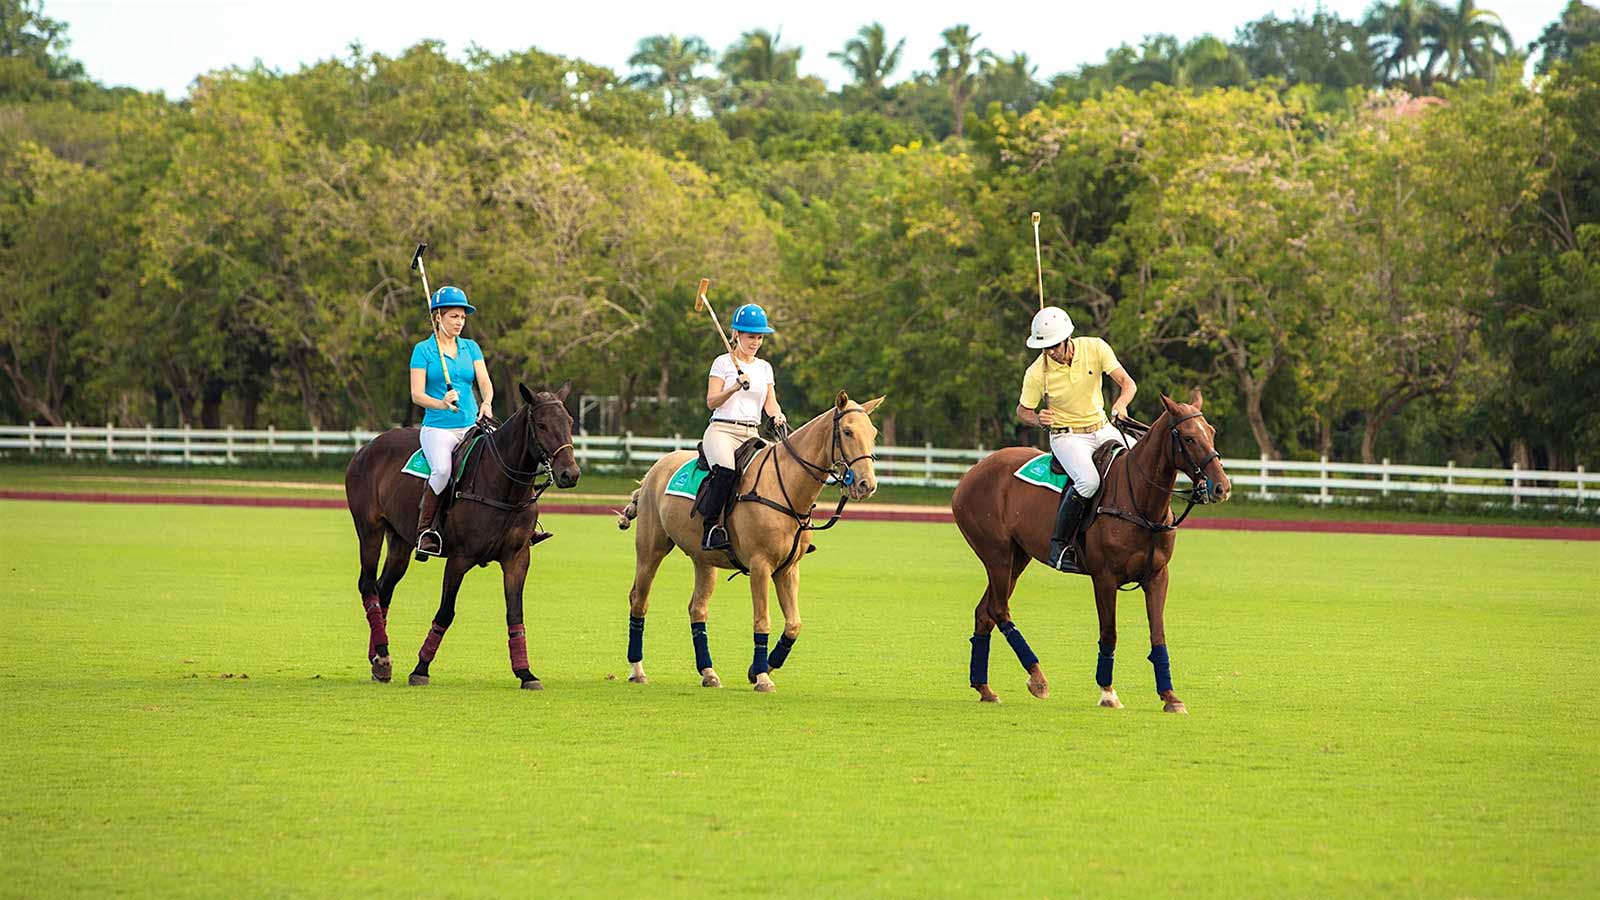 The equestrian center allows for everything from a simple, pleasant ride with the family to expert polo lessons.